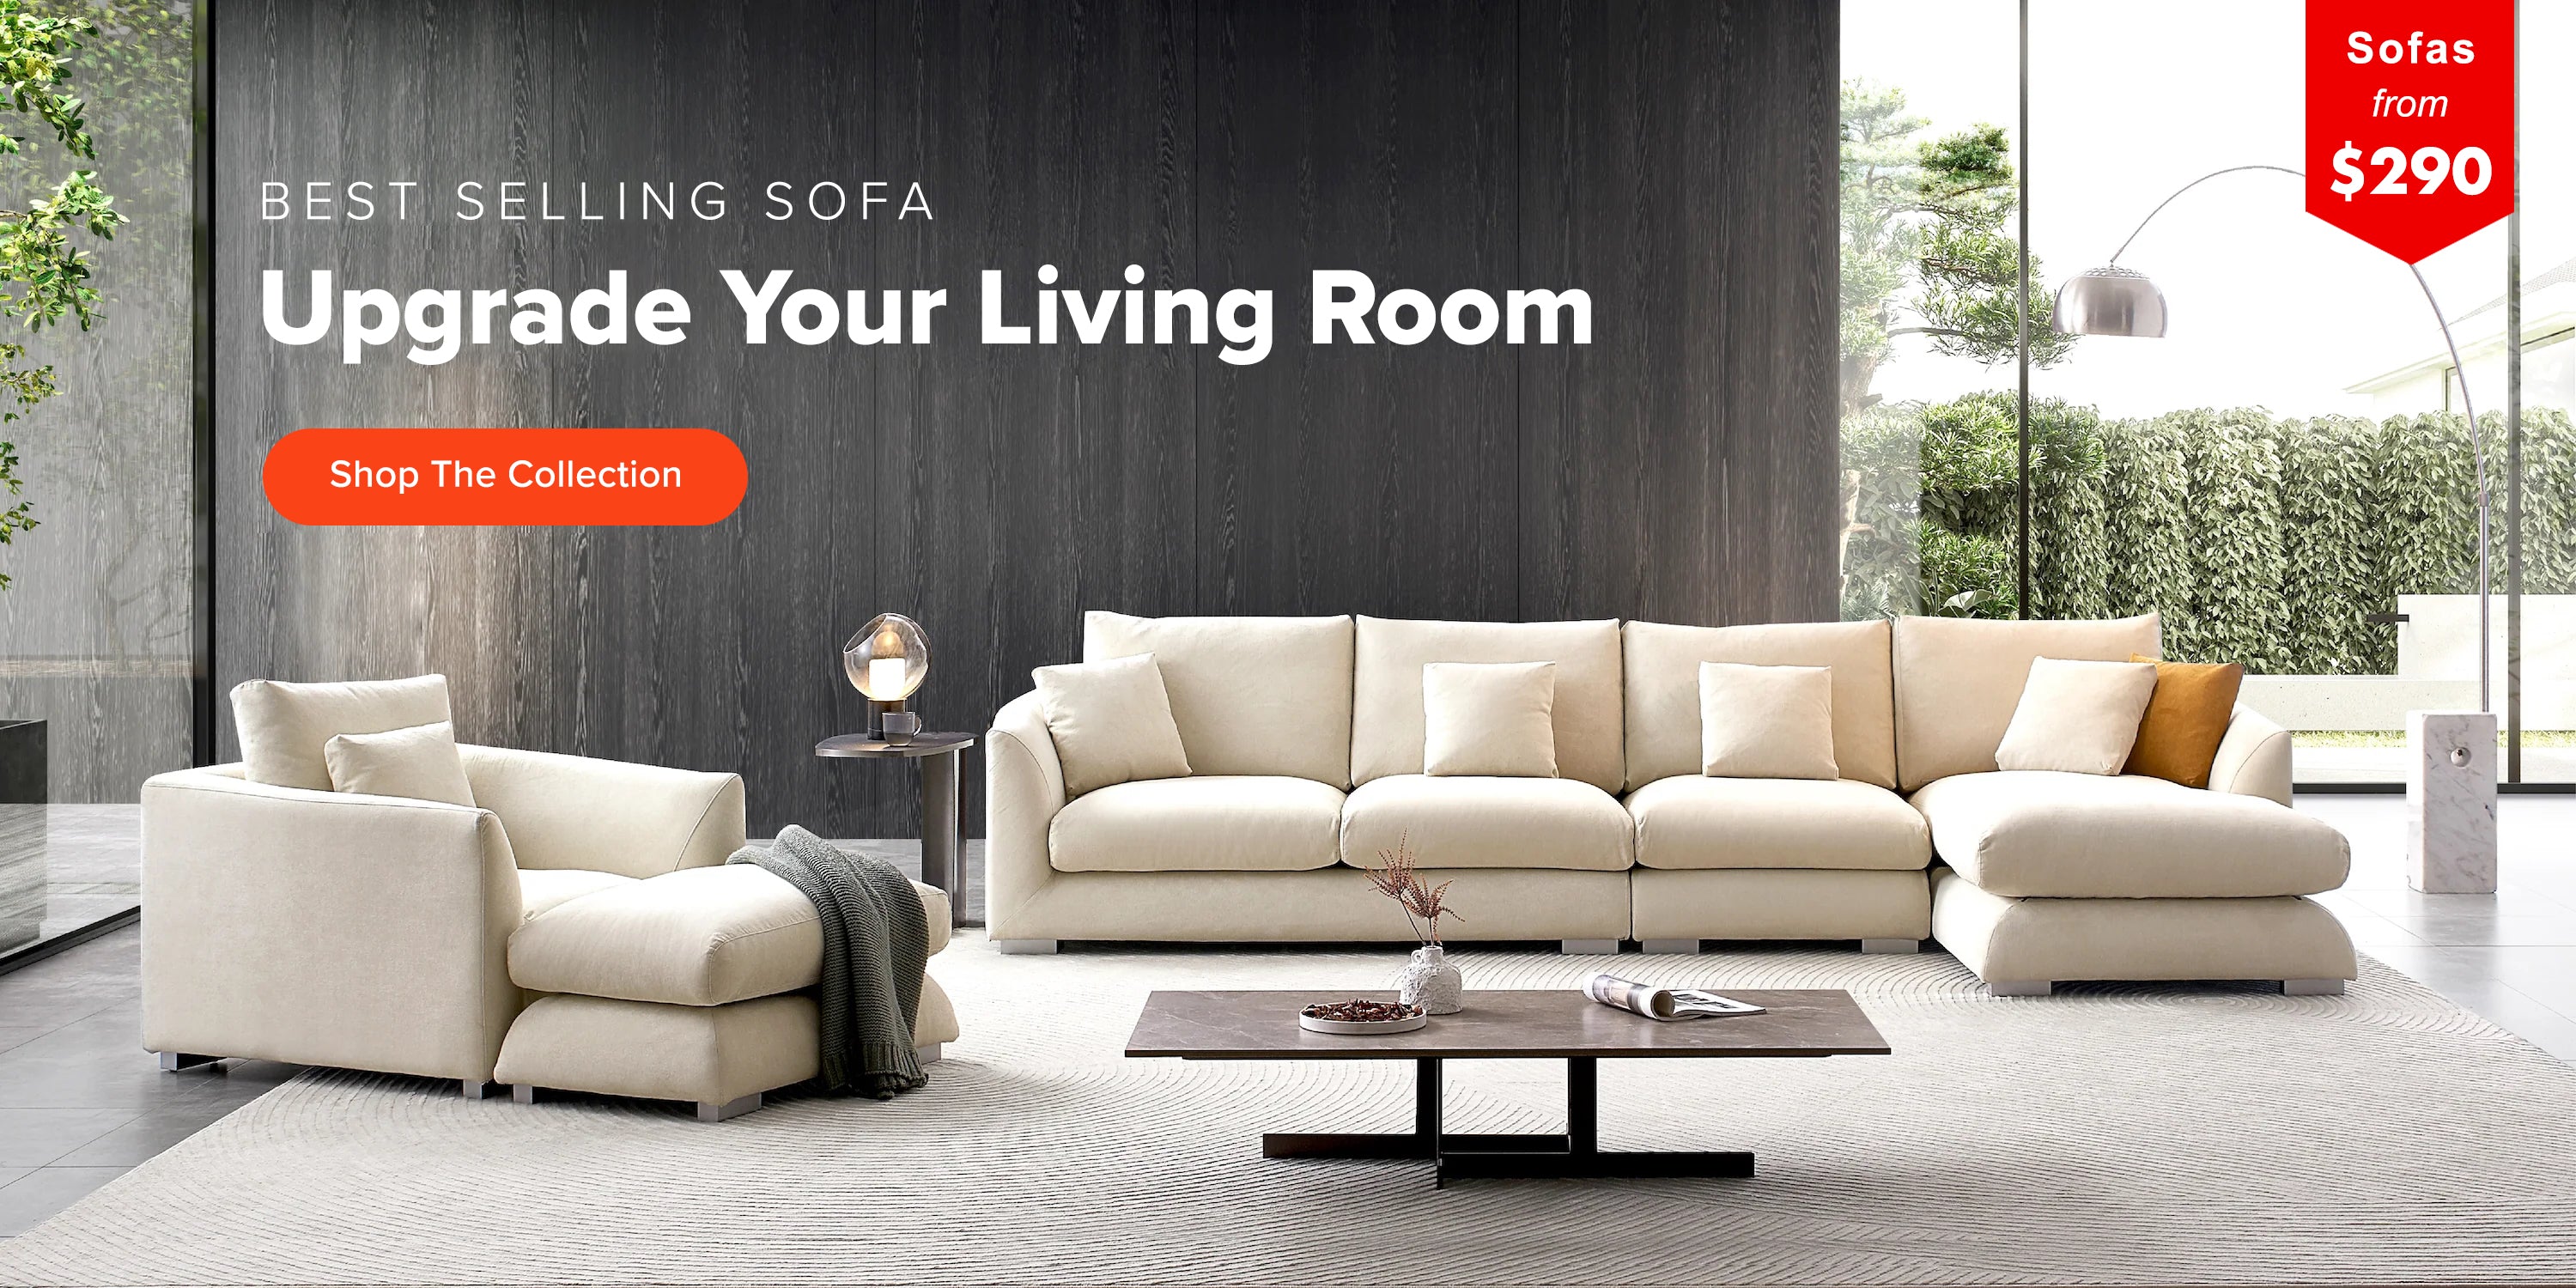 Upgrade Your Living Room